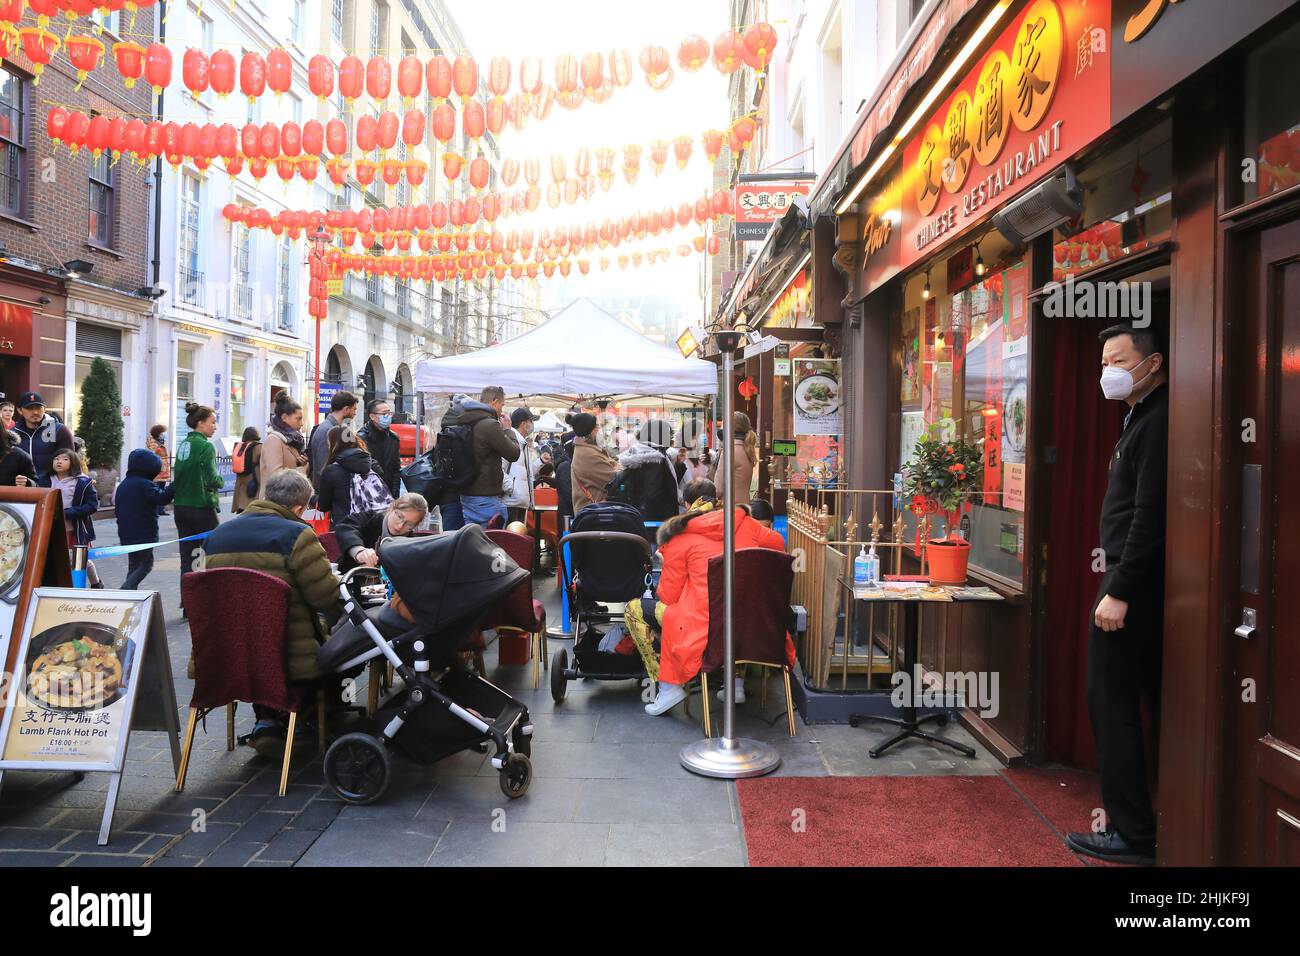 London, UK, January 30th 2022. Despite the usual parade being cancelled again due to Covid worries, people flocked to China  Town in Soho for eating, shopping and relaxing in the winter sunshine on the Sunday before Chinese New Year, which will be on February 1st. Credit: MonicaWells/Alamy Live News Stock Photo